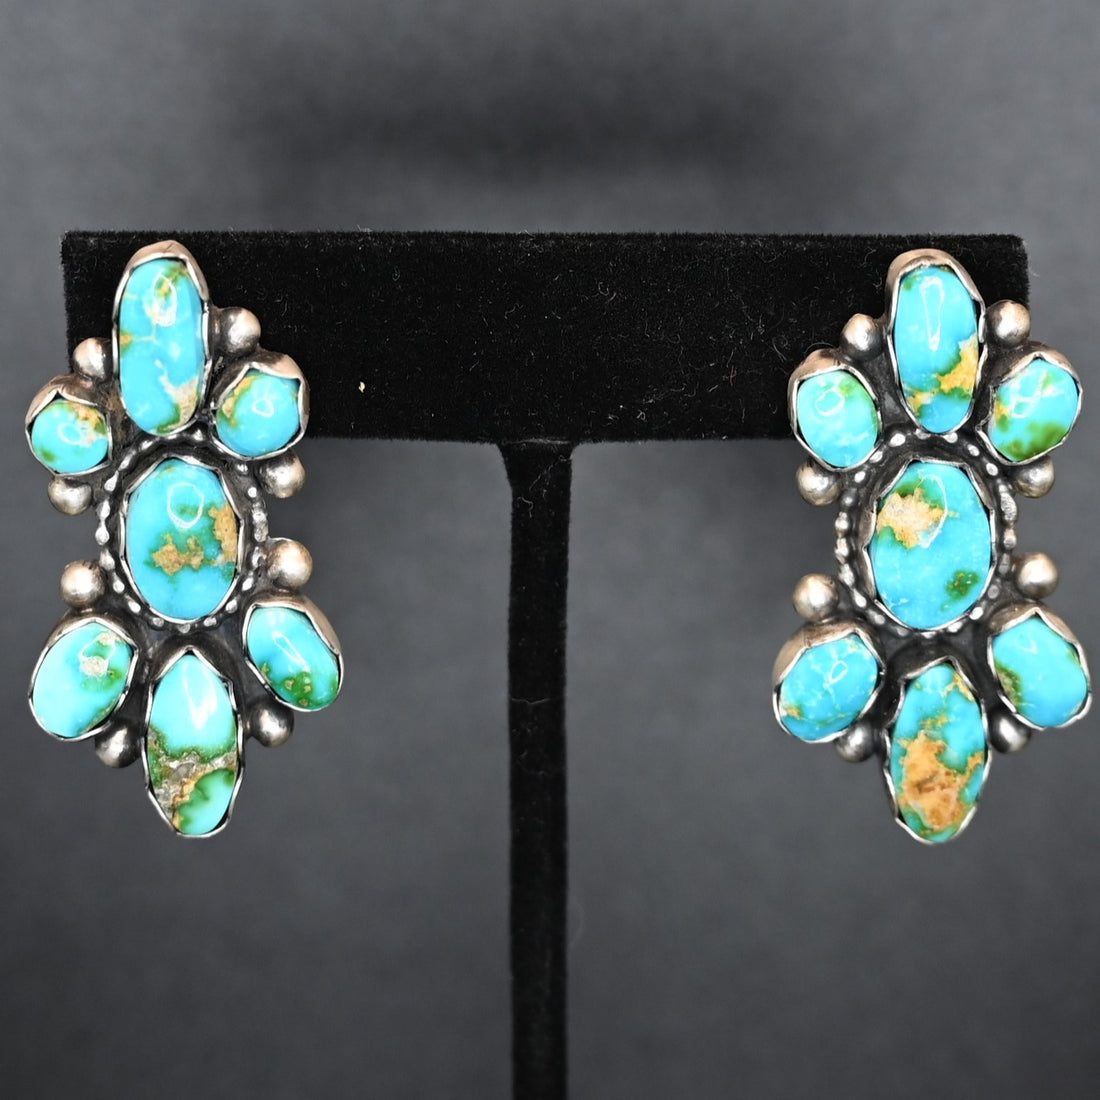 Turquoise 7 Stone Cluster Stud Earring view of earrings